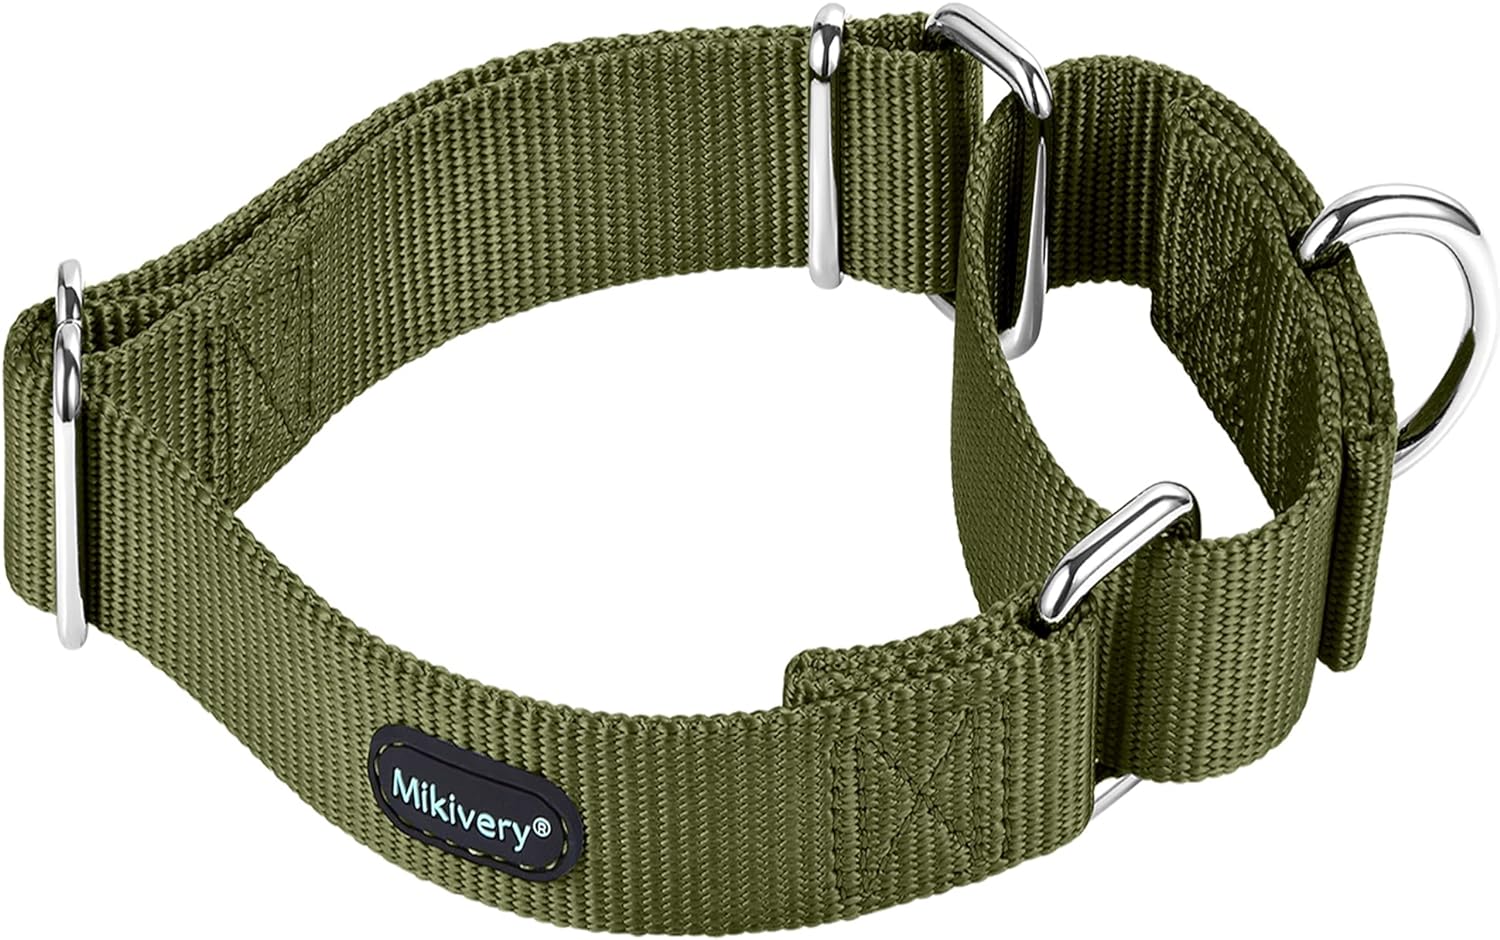 Martingale Dog Collar Nylon Adjustable and Safety Training Colourful Comfortable Metal Buckle Pet Collars for Small Medium and Large Dogs(Military Green,M)